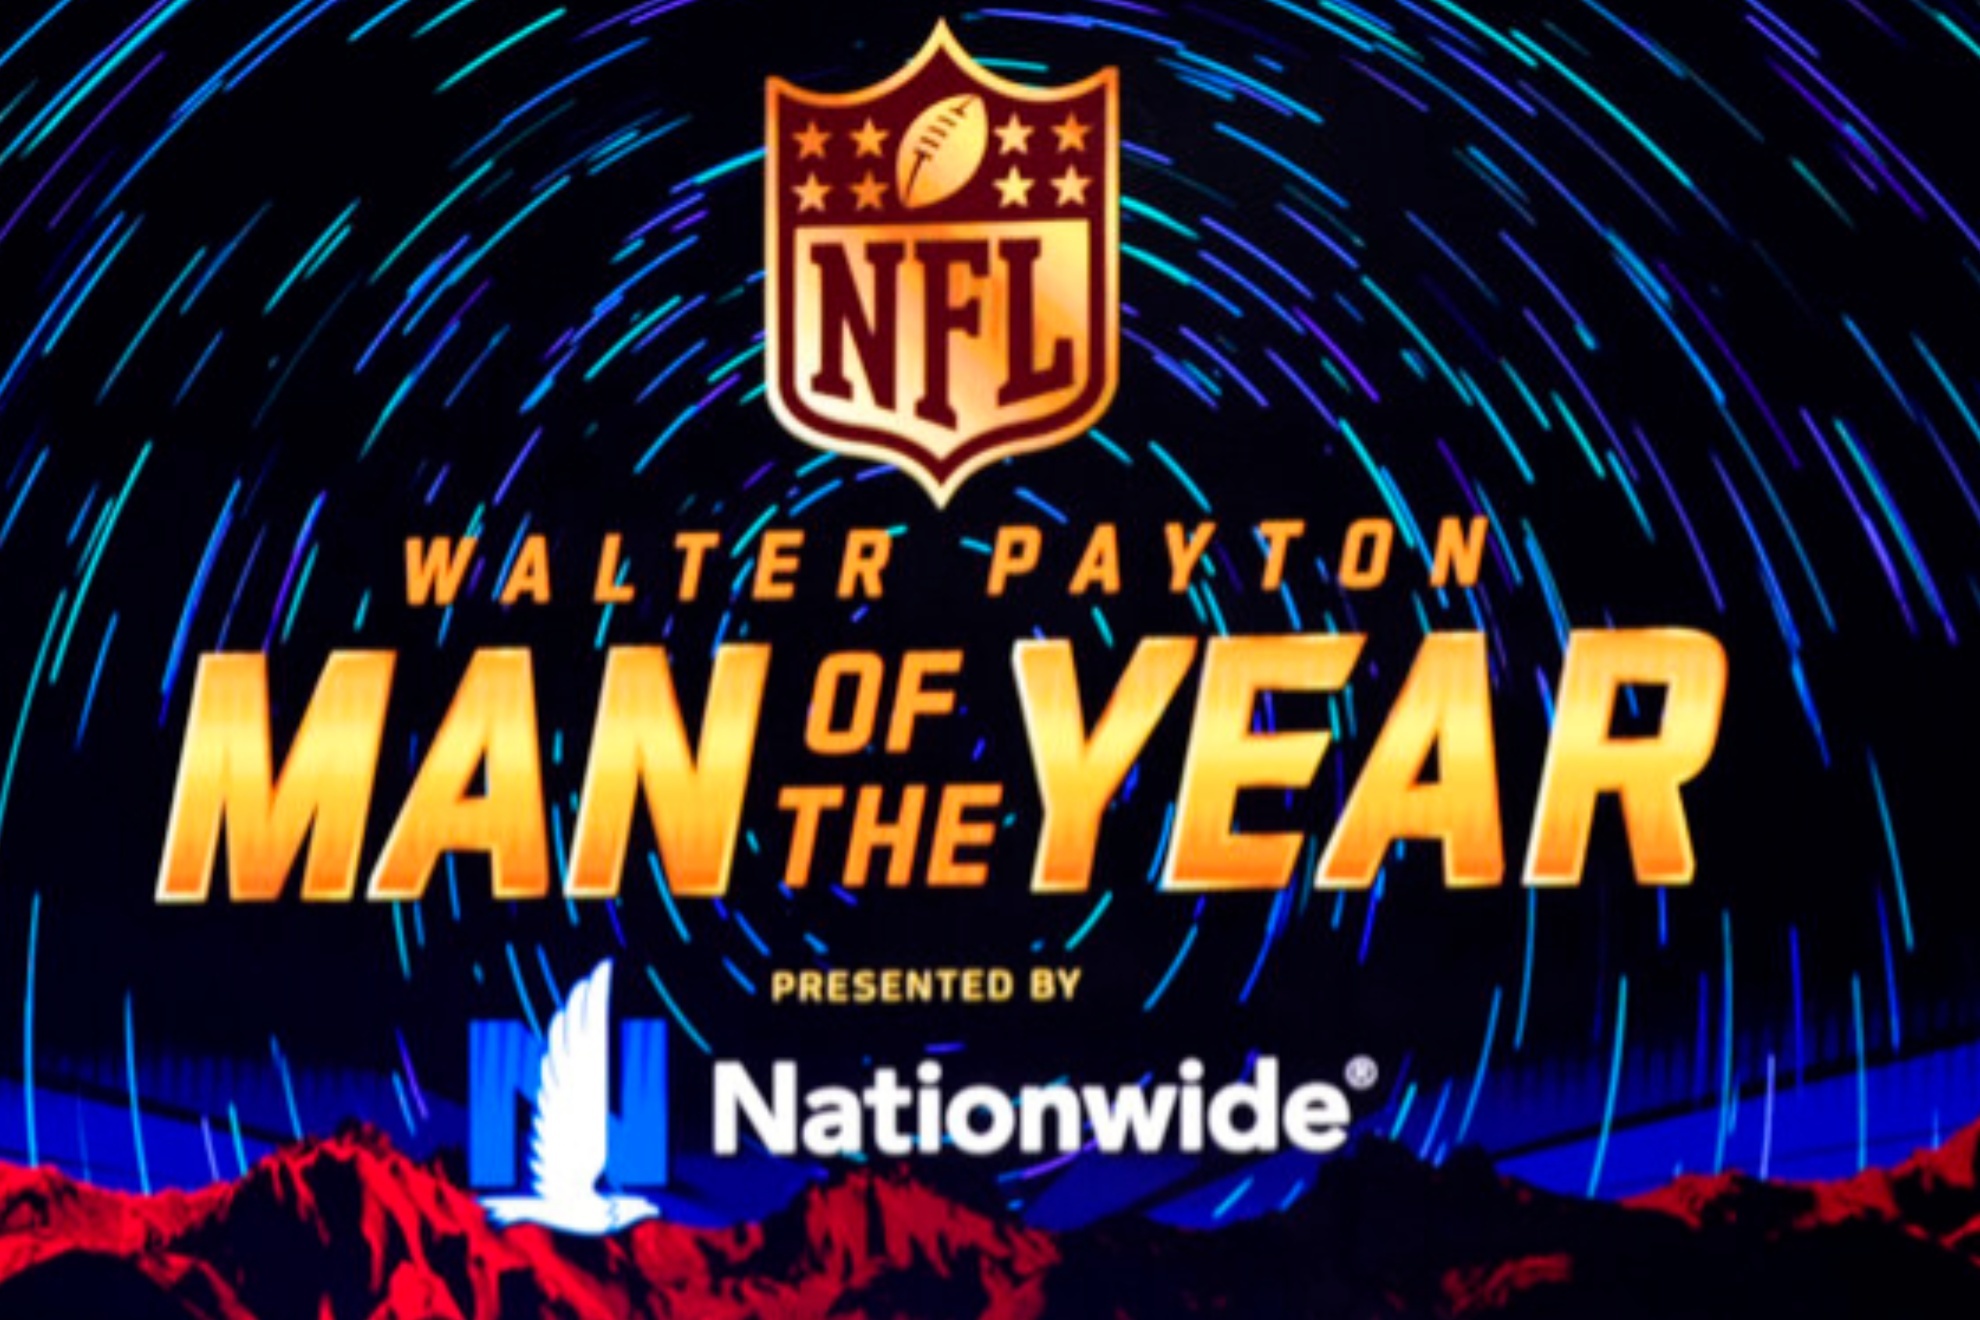 The NFL announced its 32 nominees for the Walter Payton Man of the Year Award